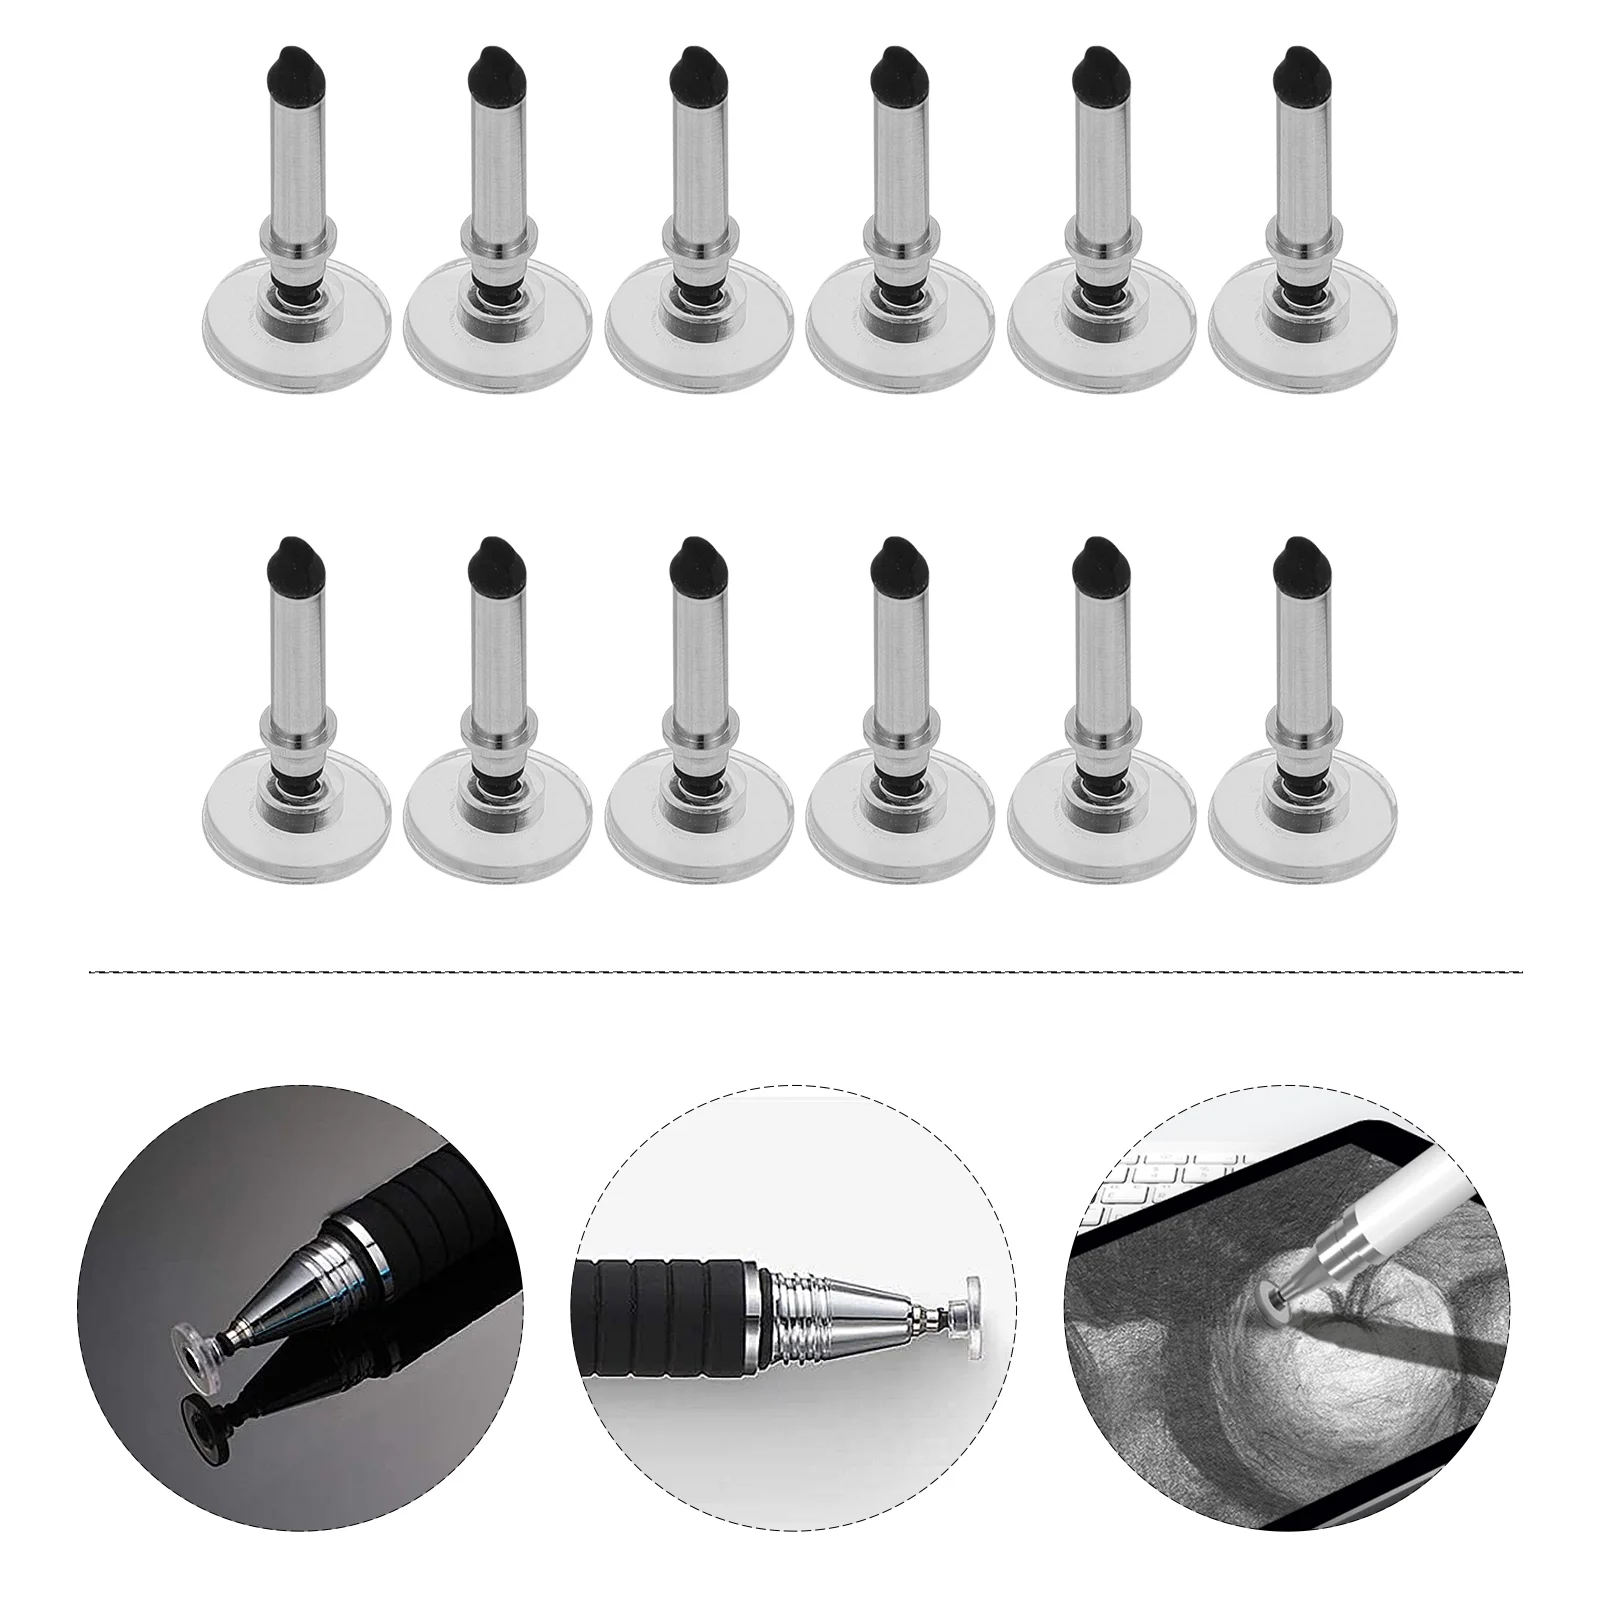 

12pcs Disc Tip Precision Stylus for Touch Screen Devices Tips for Touch Screen Devices Touchscreen Pen Nibs